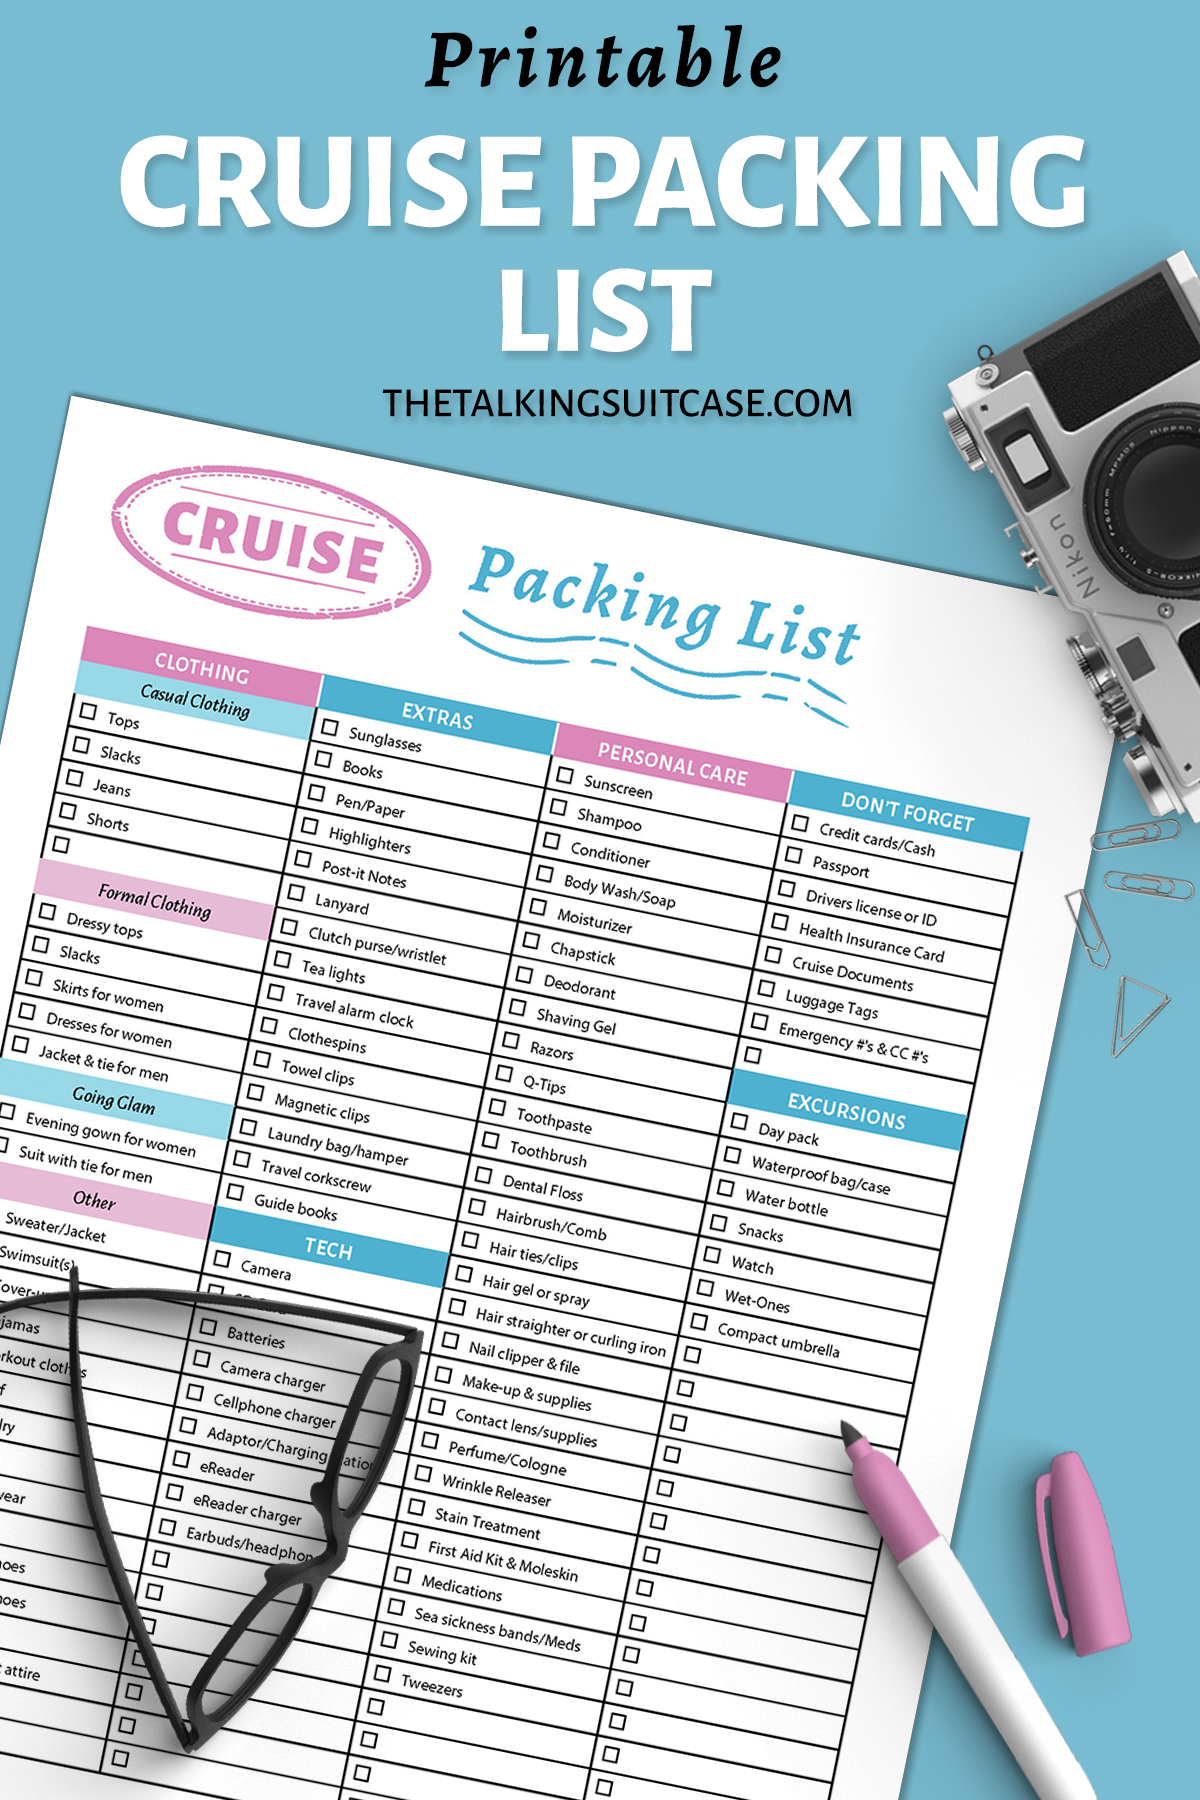 20 Things to Pack for a Cruise: Plus Printable Packing List for Cruise